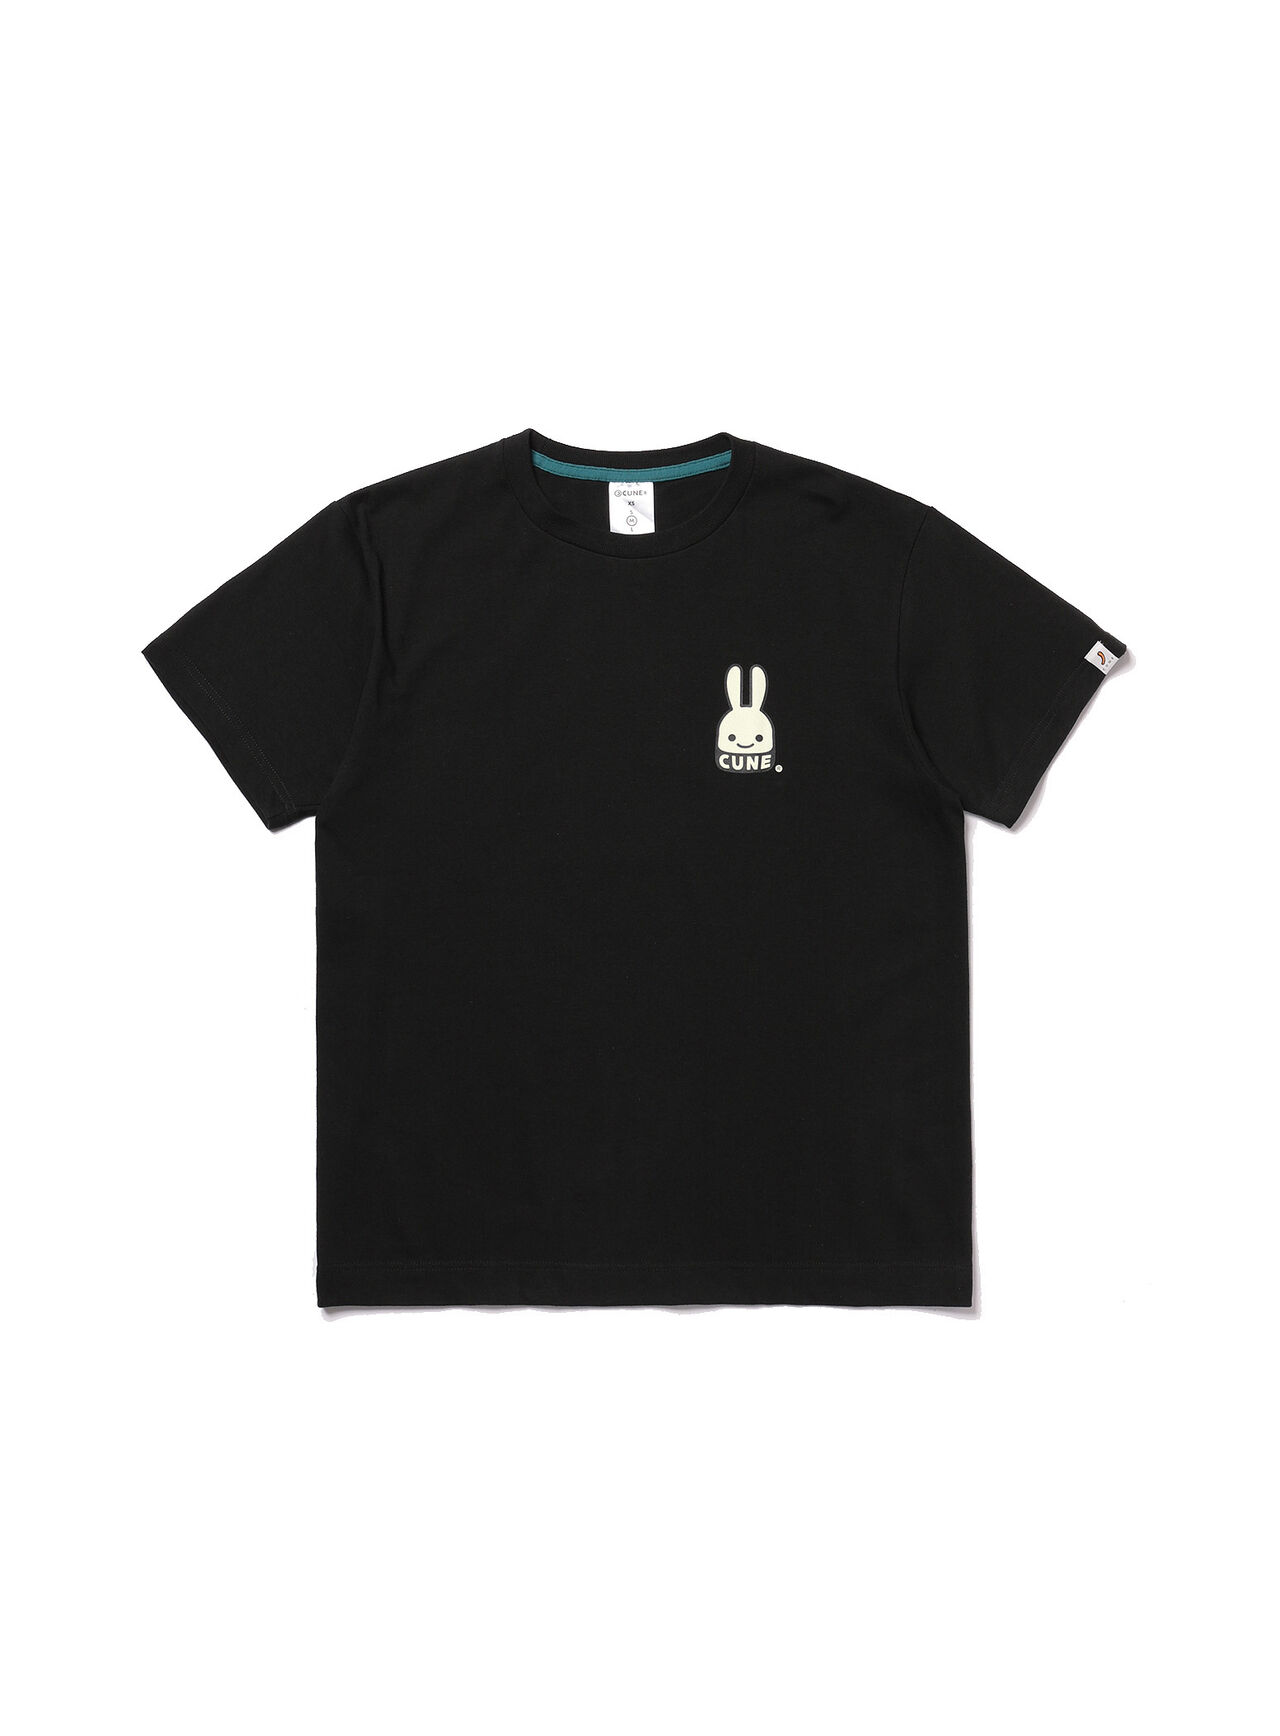 S/S Tee CUNE Rabbit,L, large image number 1